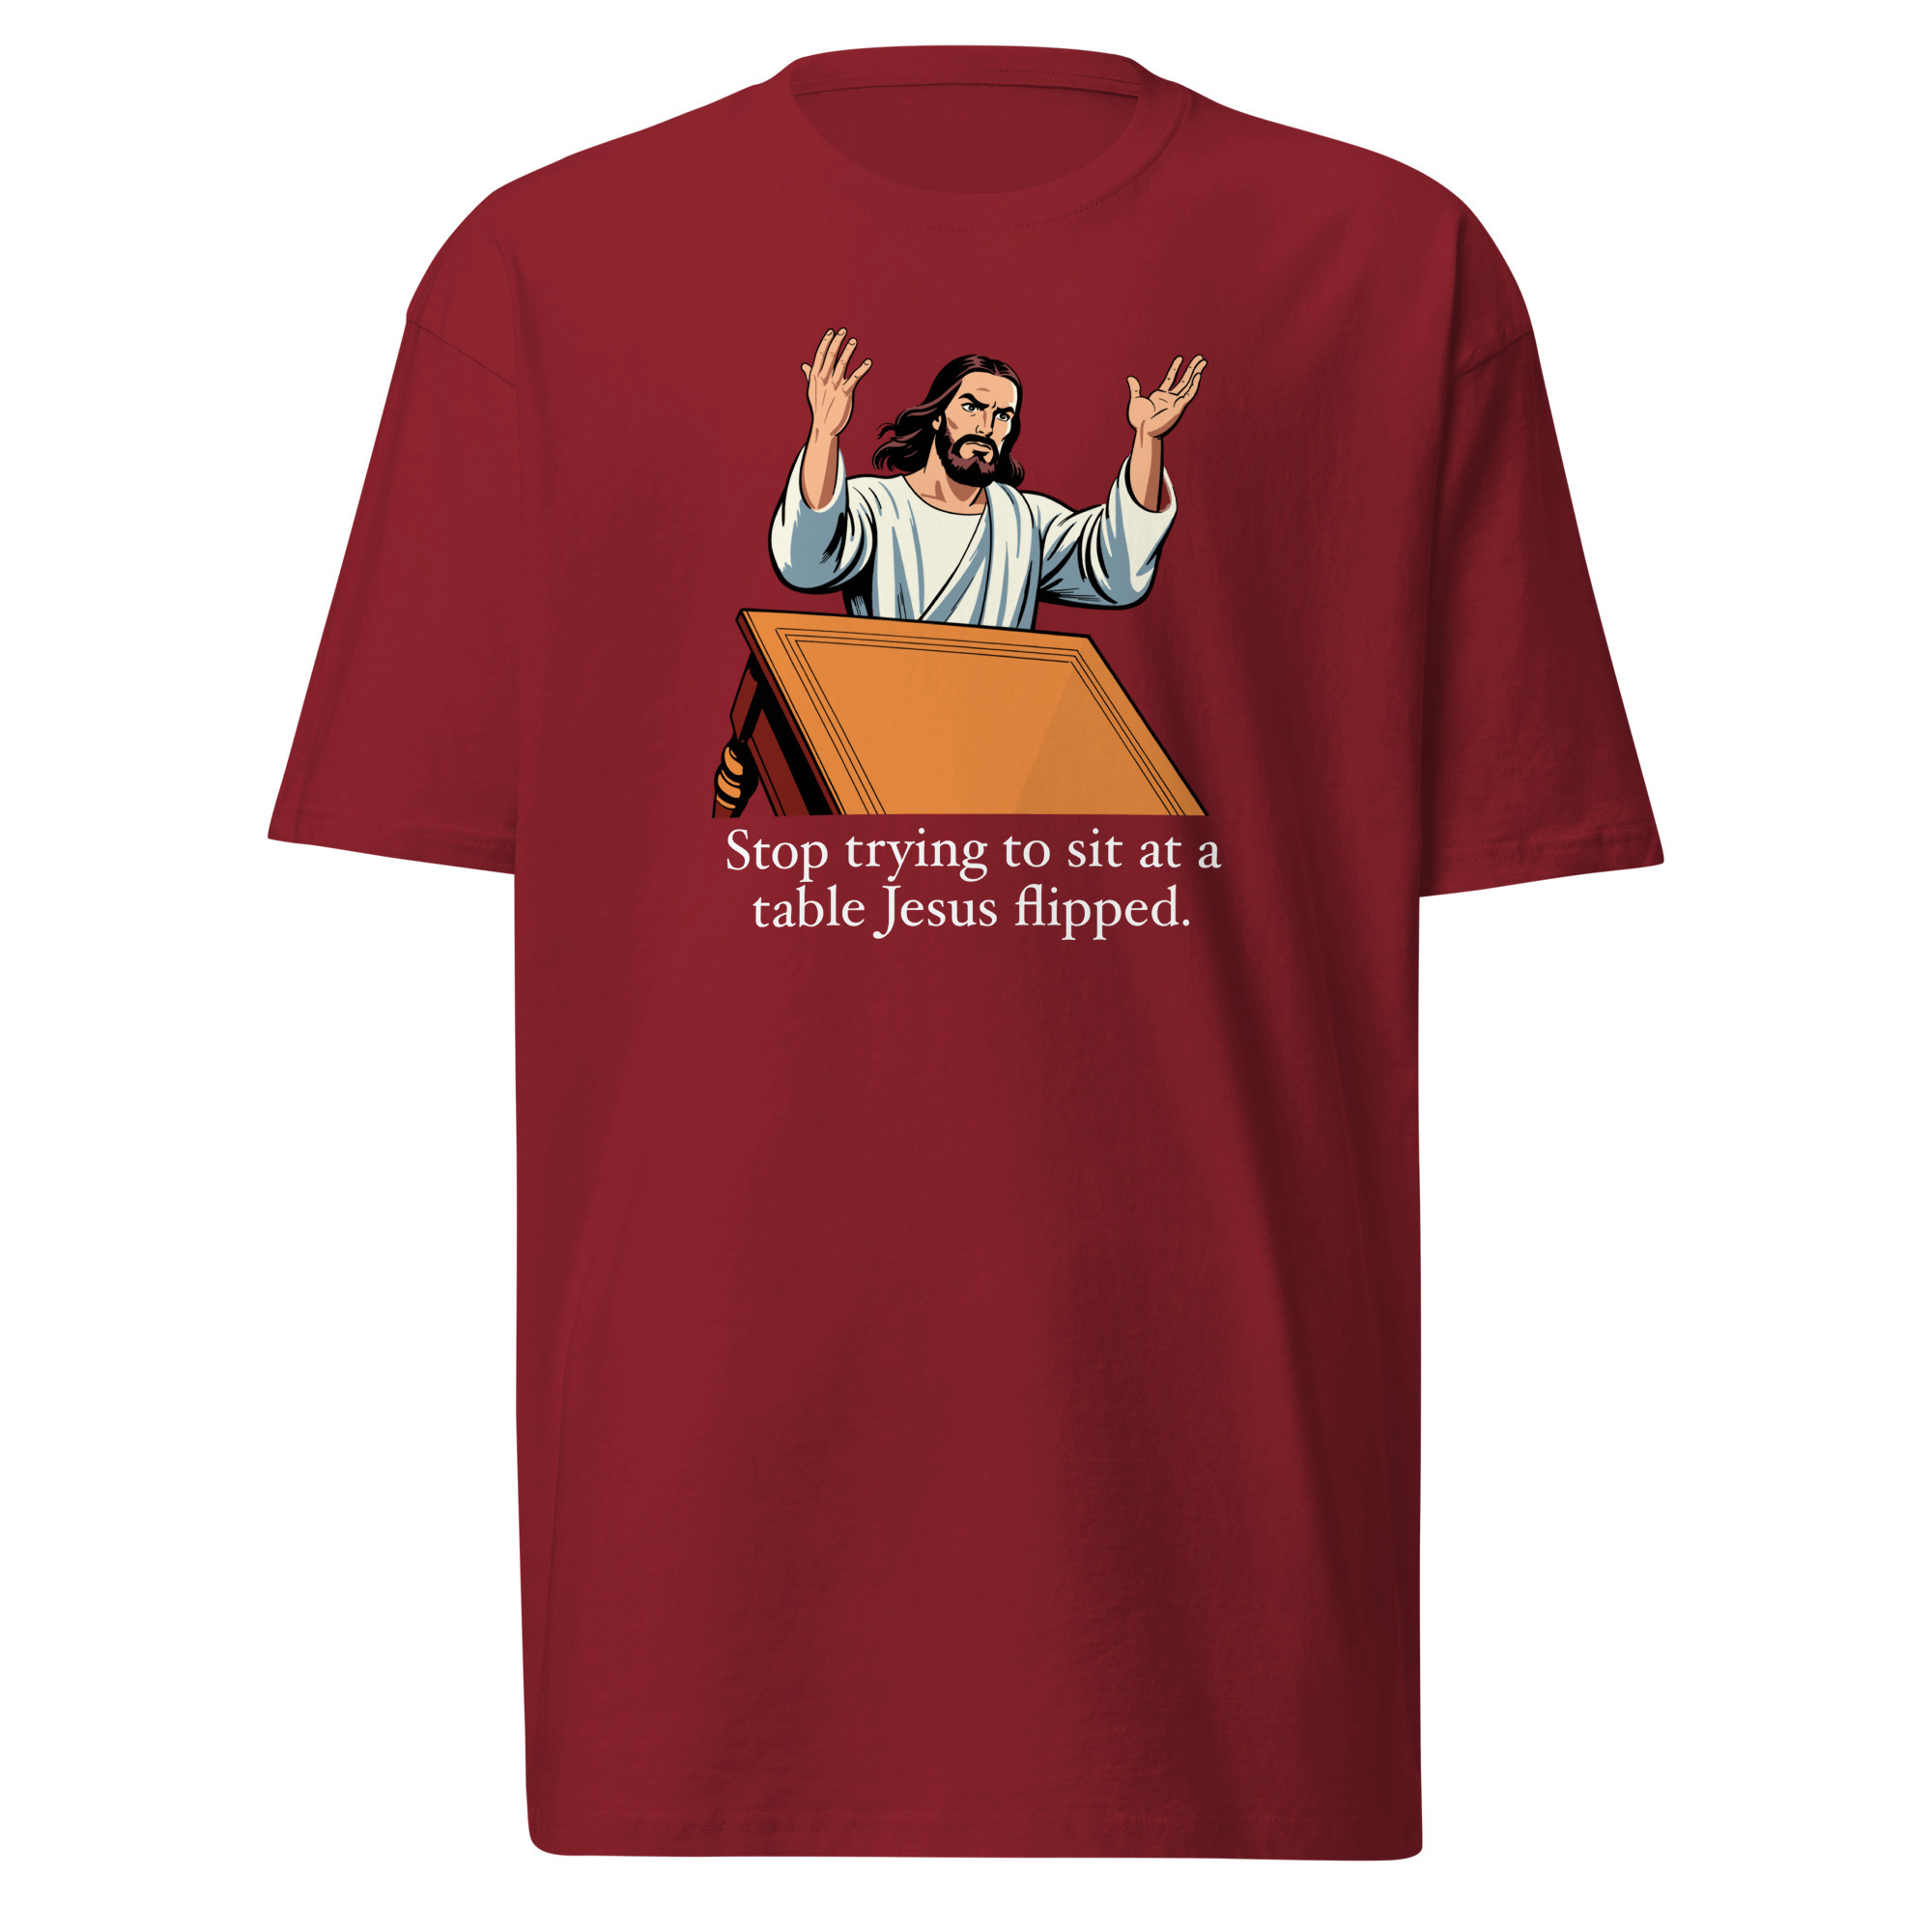 Stop trying to sit at a table Jesus flipped T-Shirt - Brick Red / XL